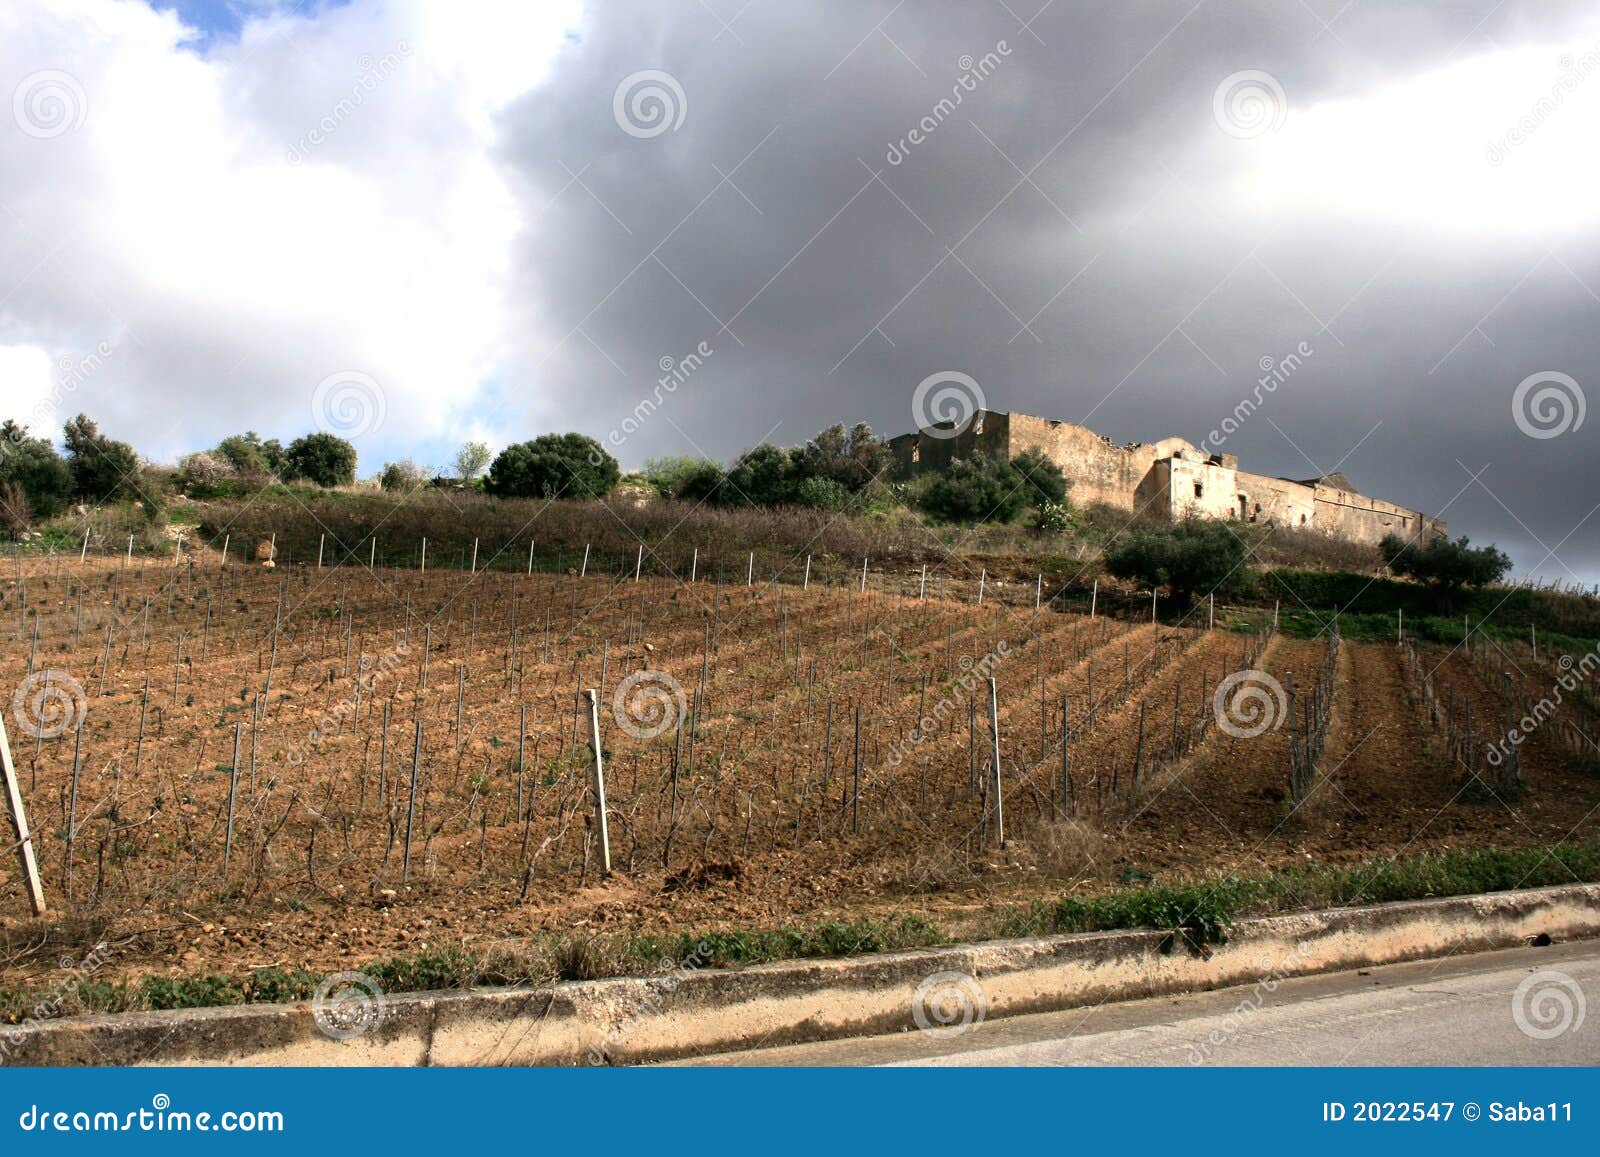 ancient stronghold farm. vineyards cultivation. fields & trees